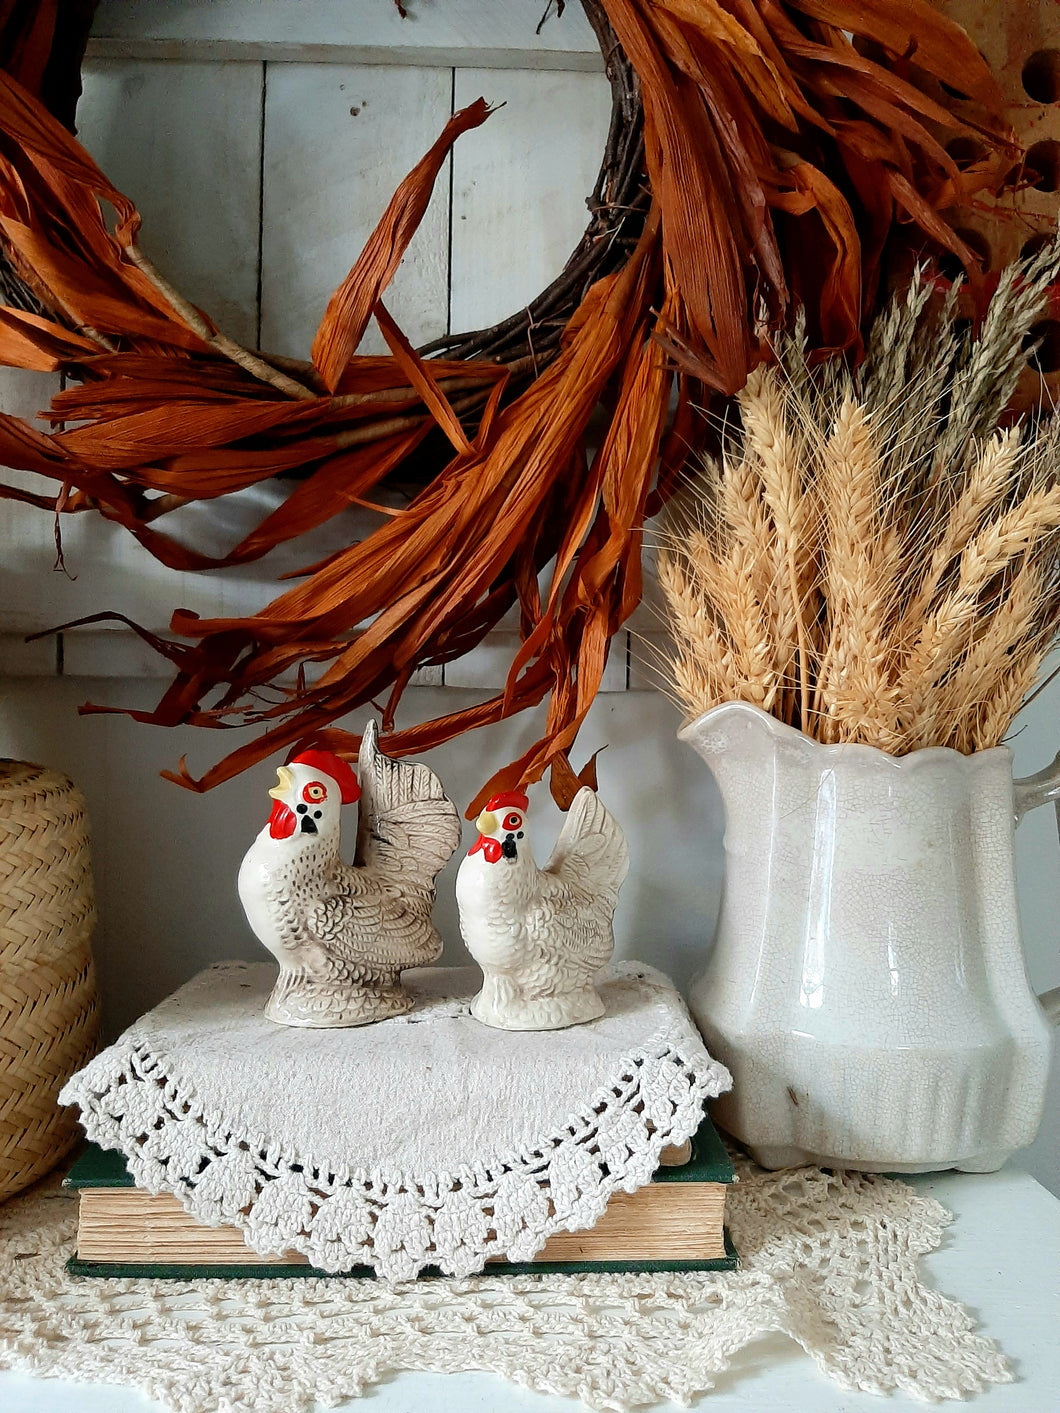 Vintage farmhouse Rooster & Hen Chicken Salt and Pepper Shakers - Set of 2 - Made in Japan